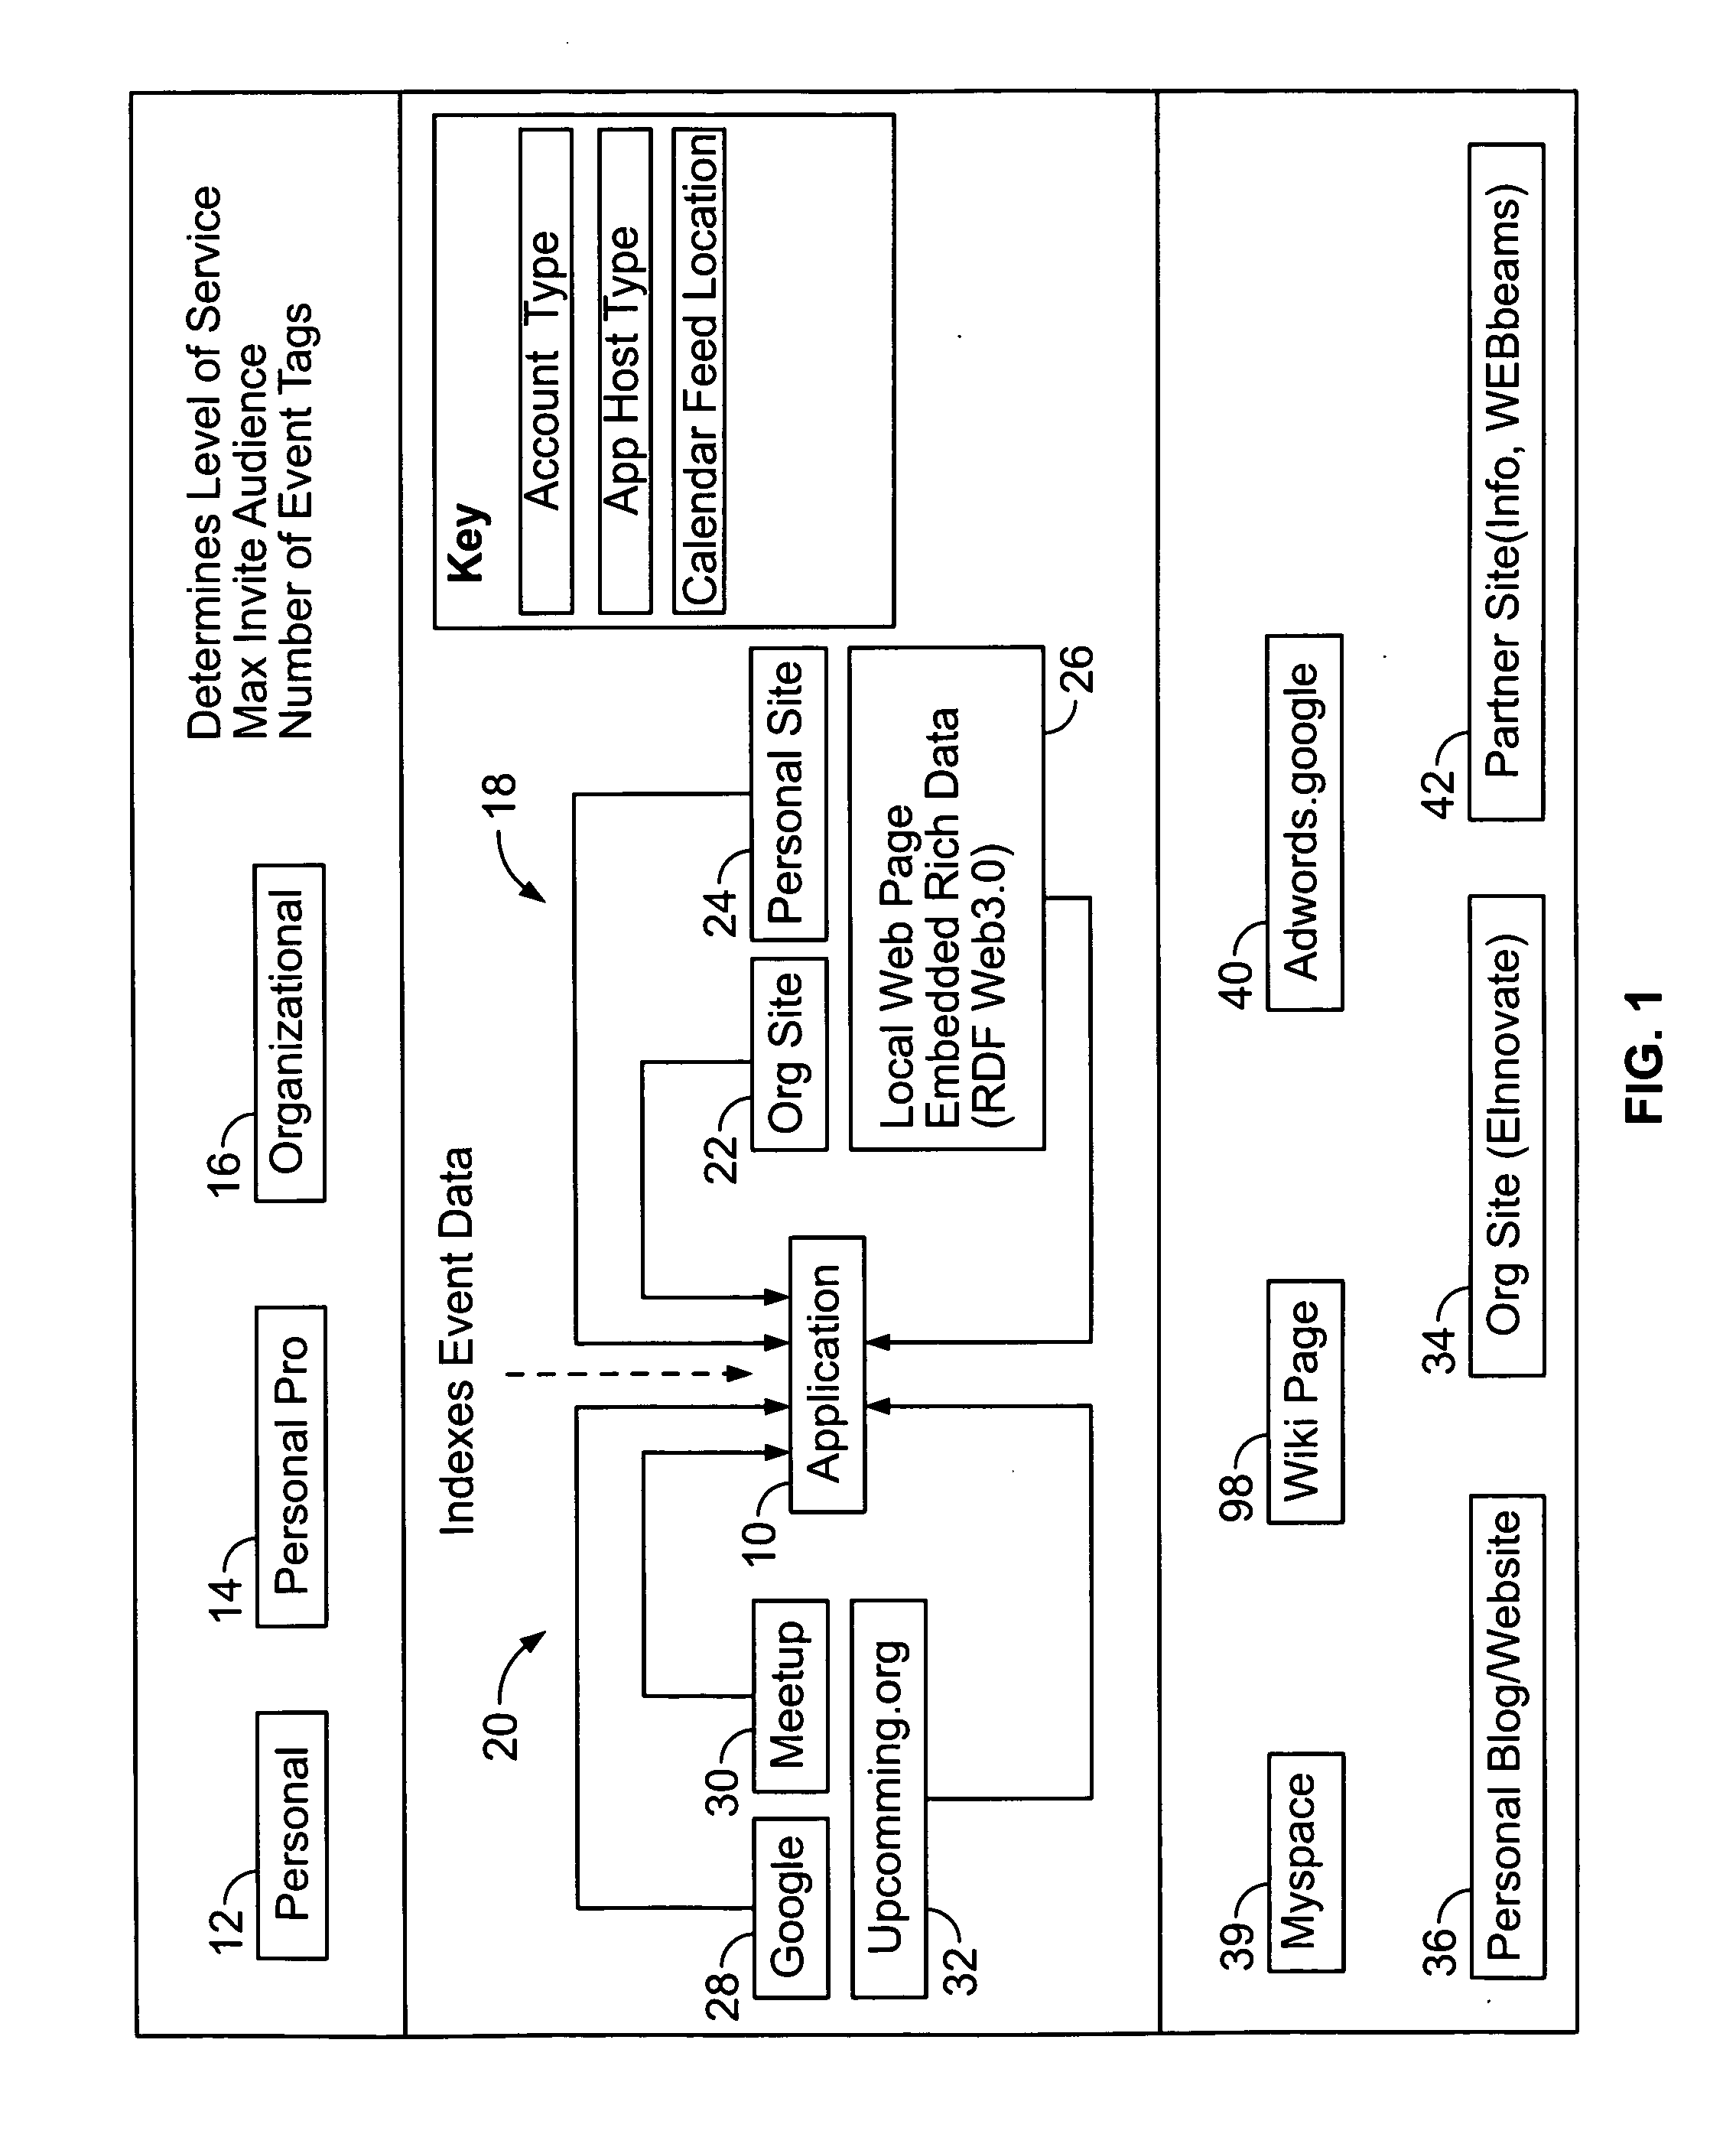 Event management system and method with calendar interface